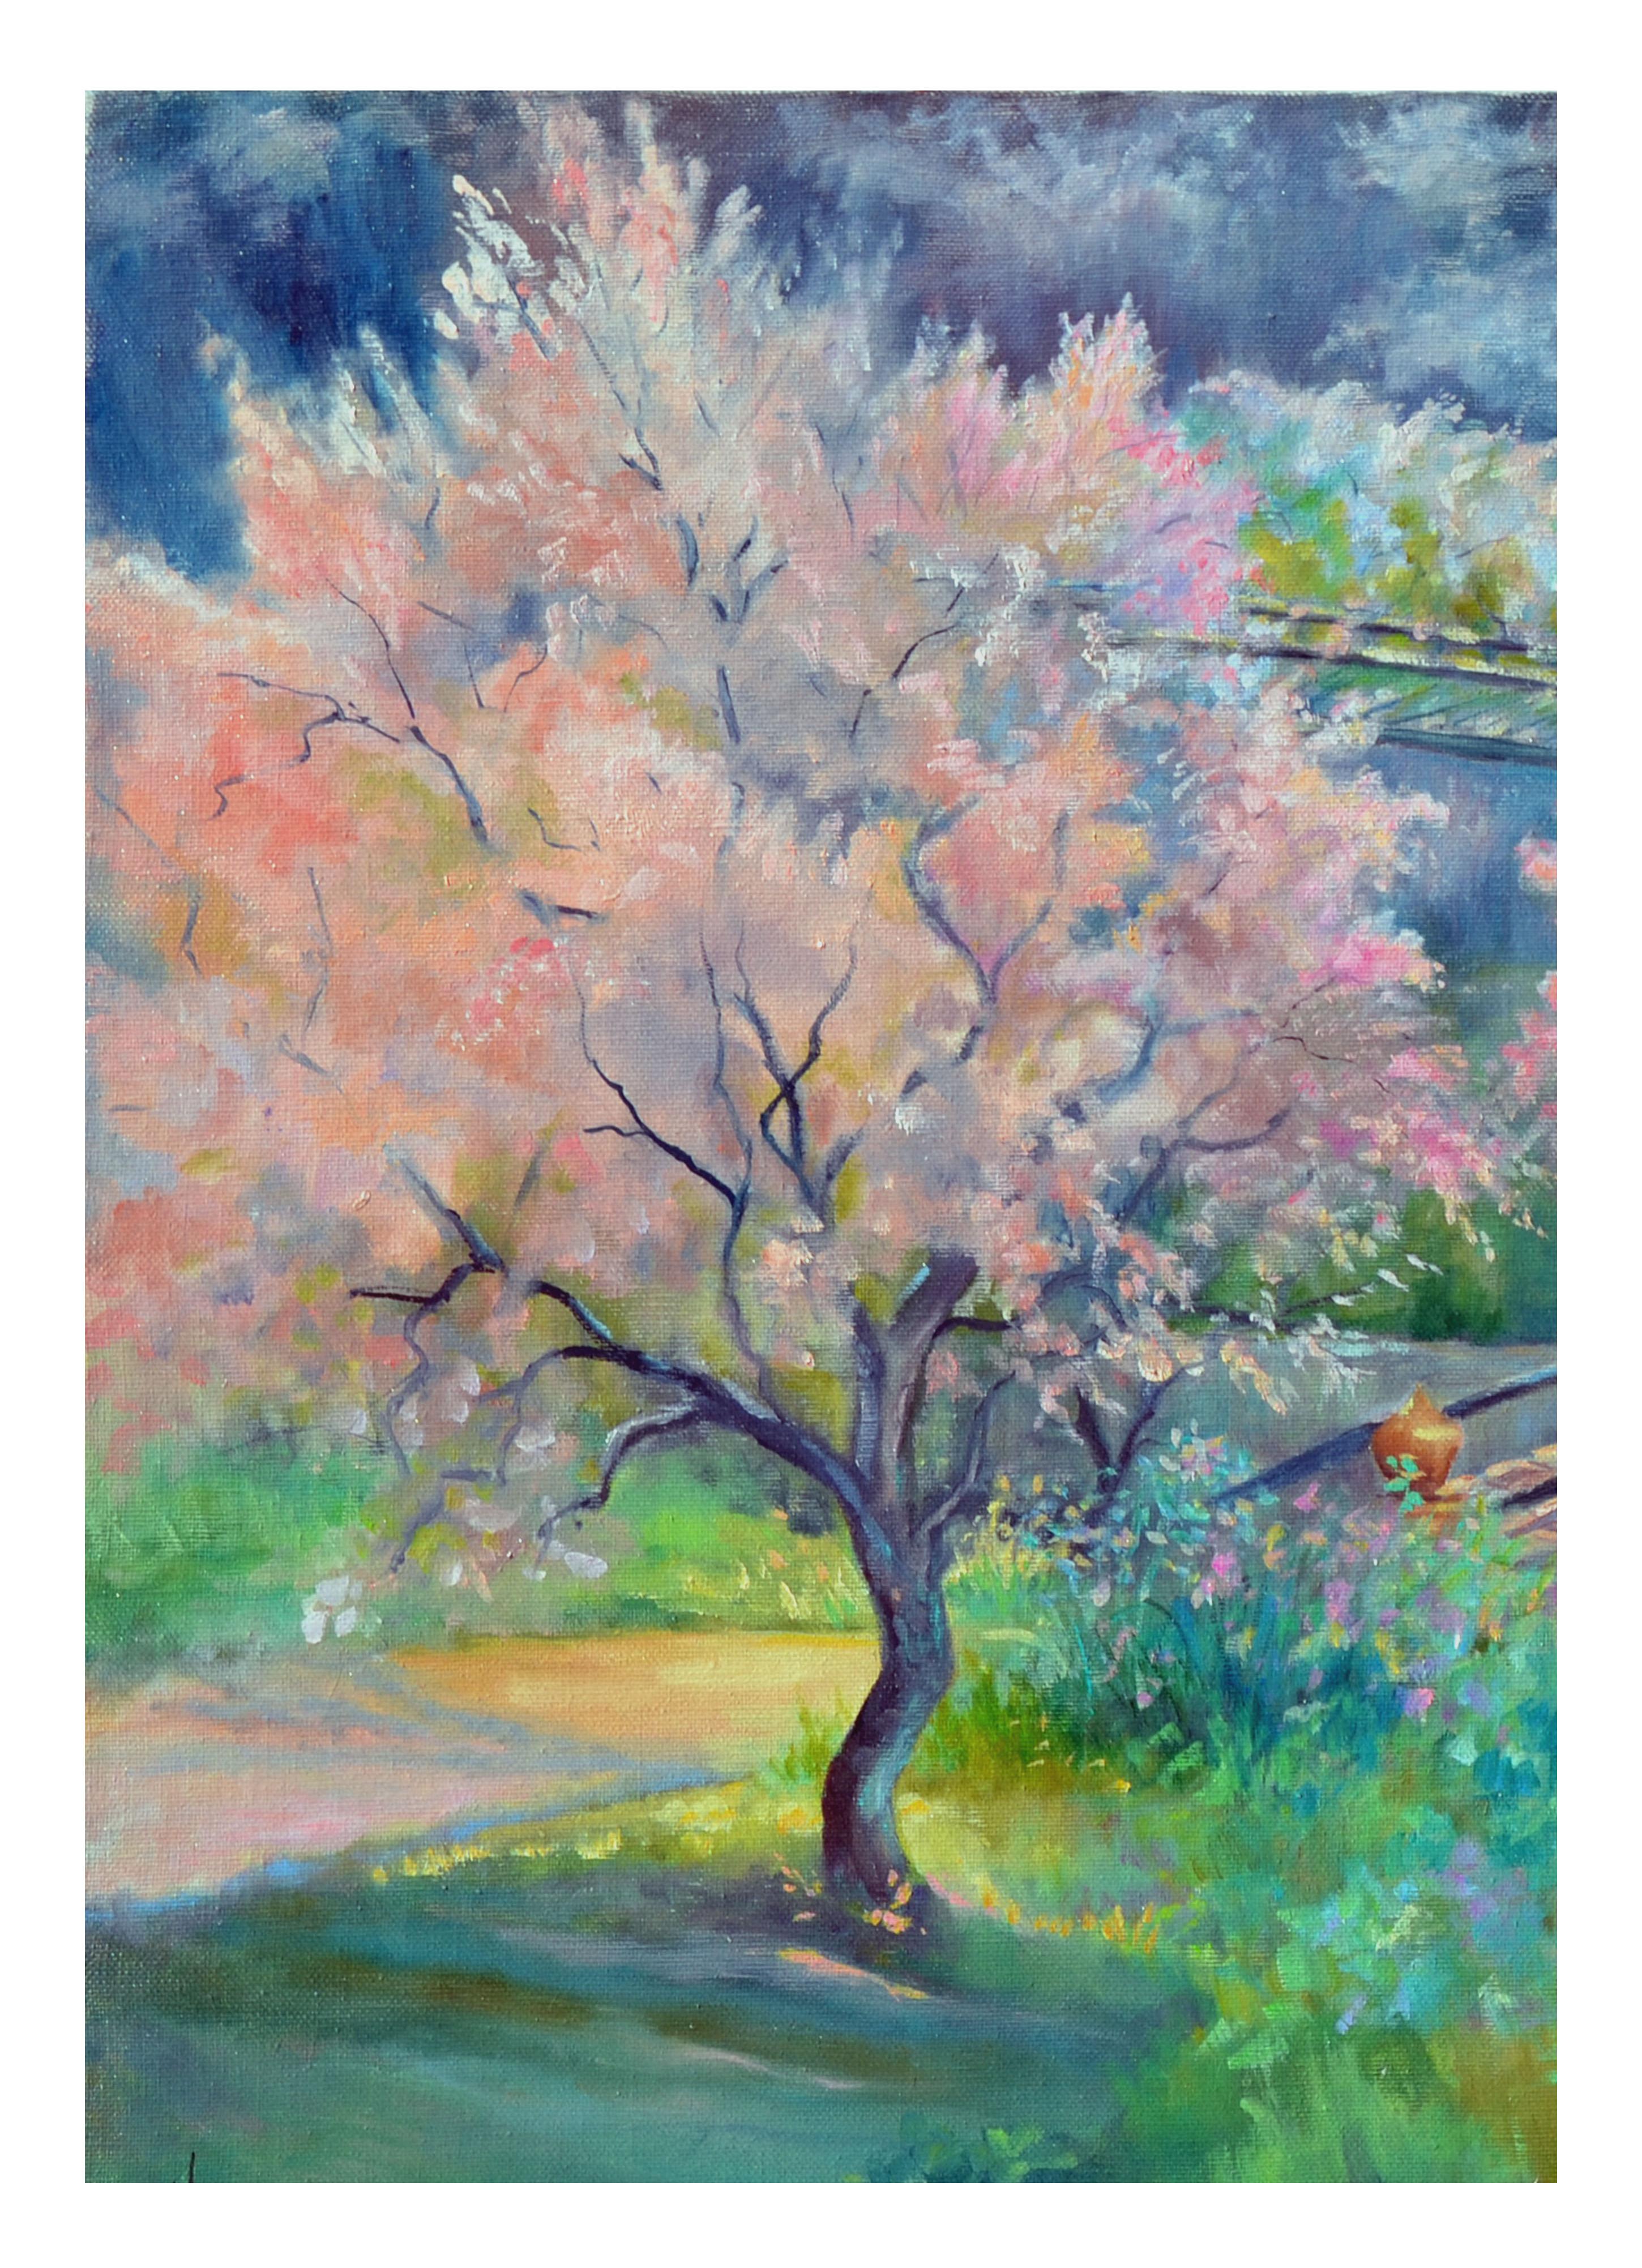 Cherry Tree and Wisteria in Bloom Golden Gate Park, Springtime Landscape - Painting by June A. Hughes